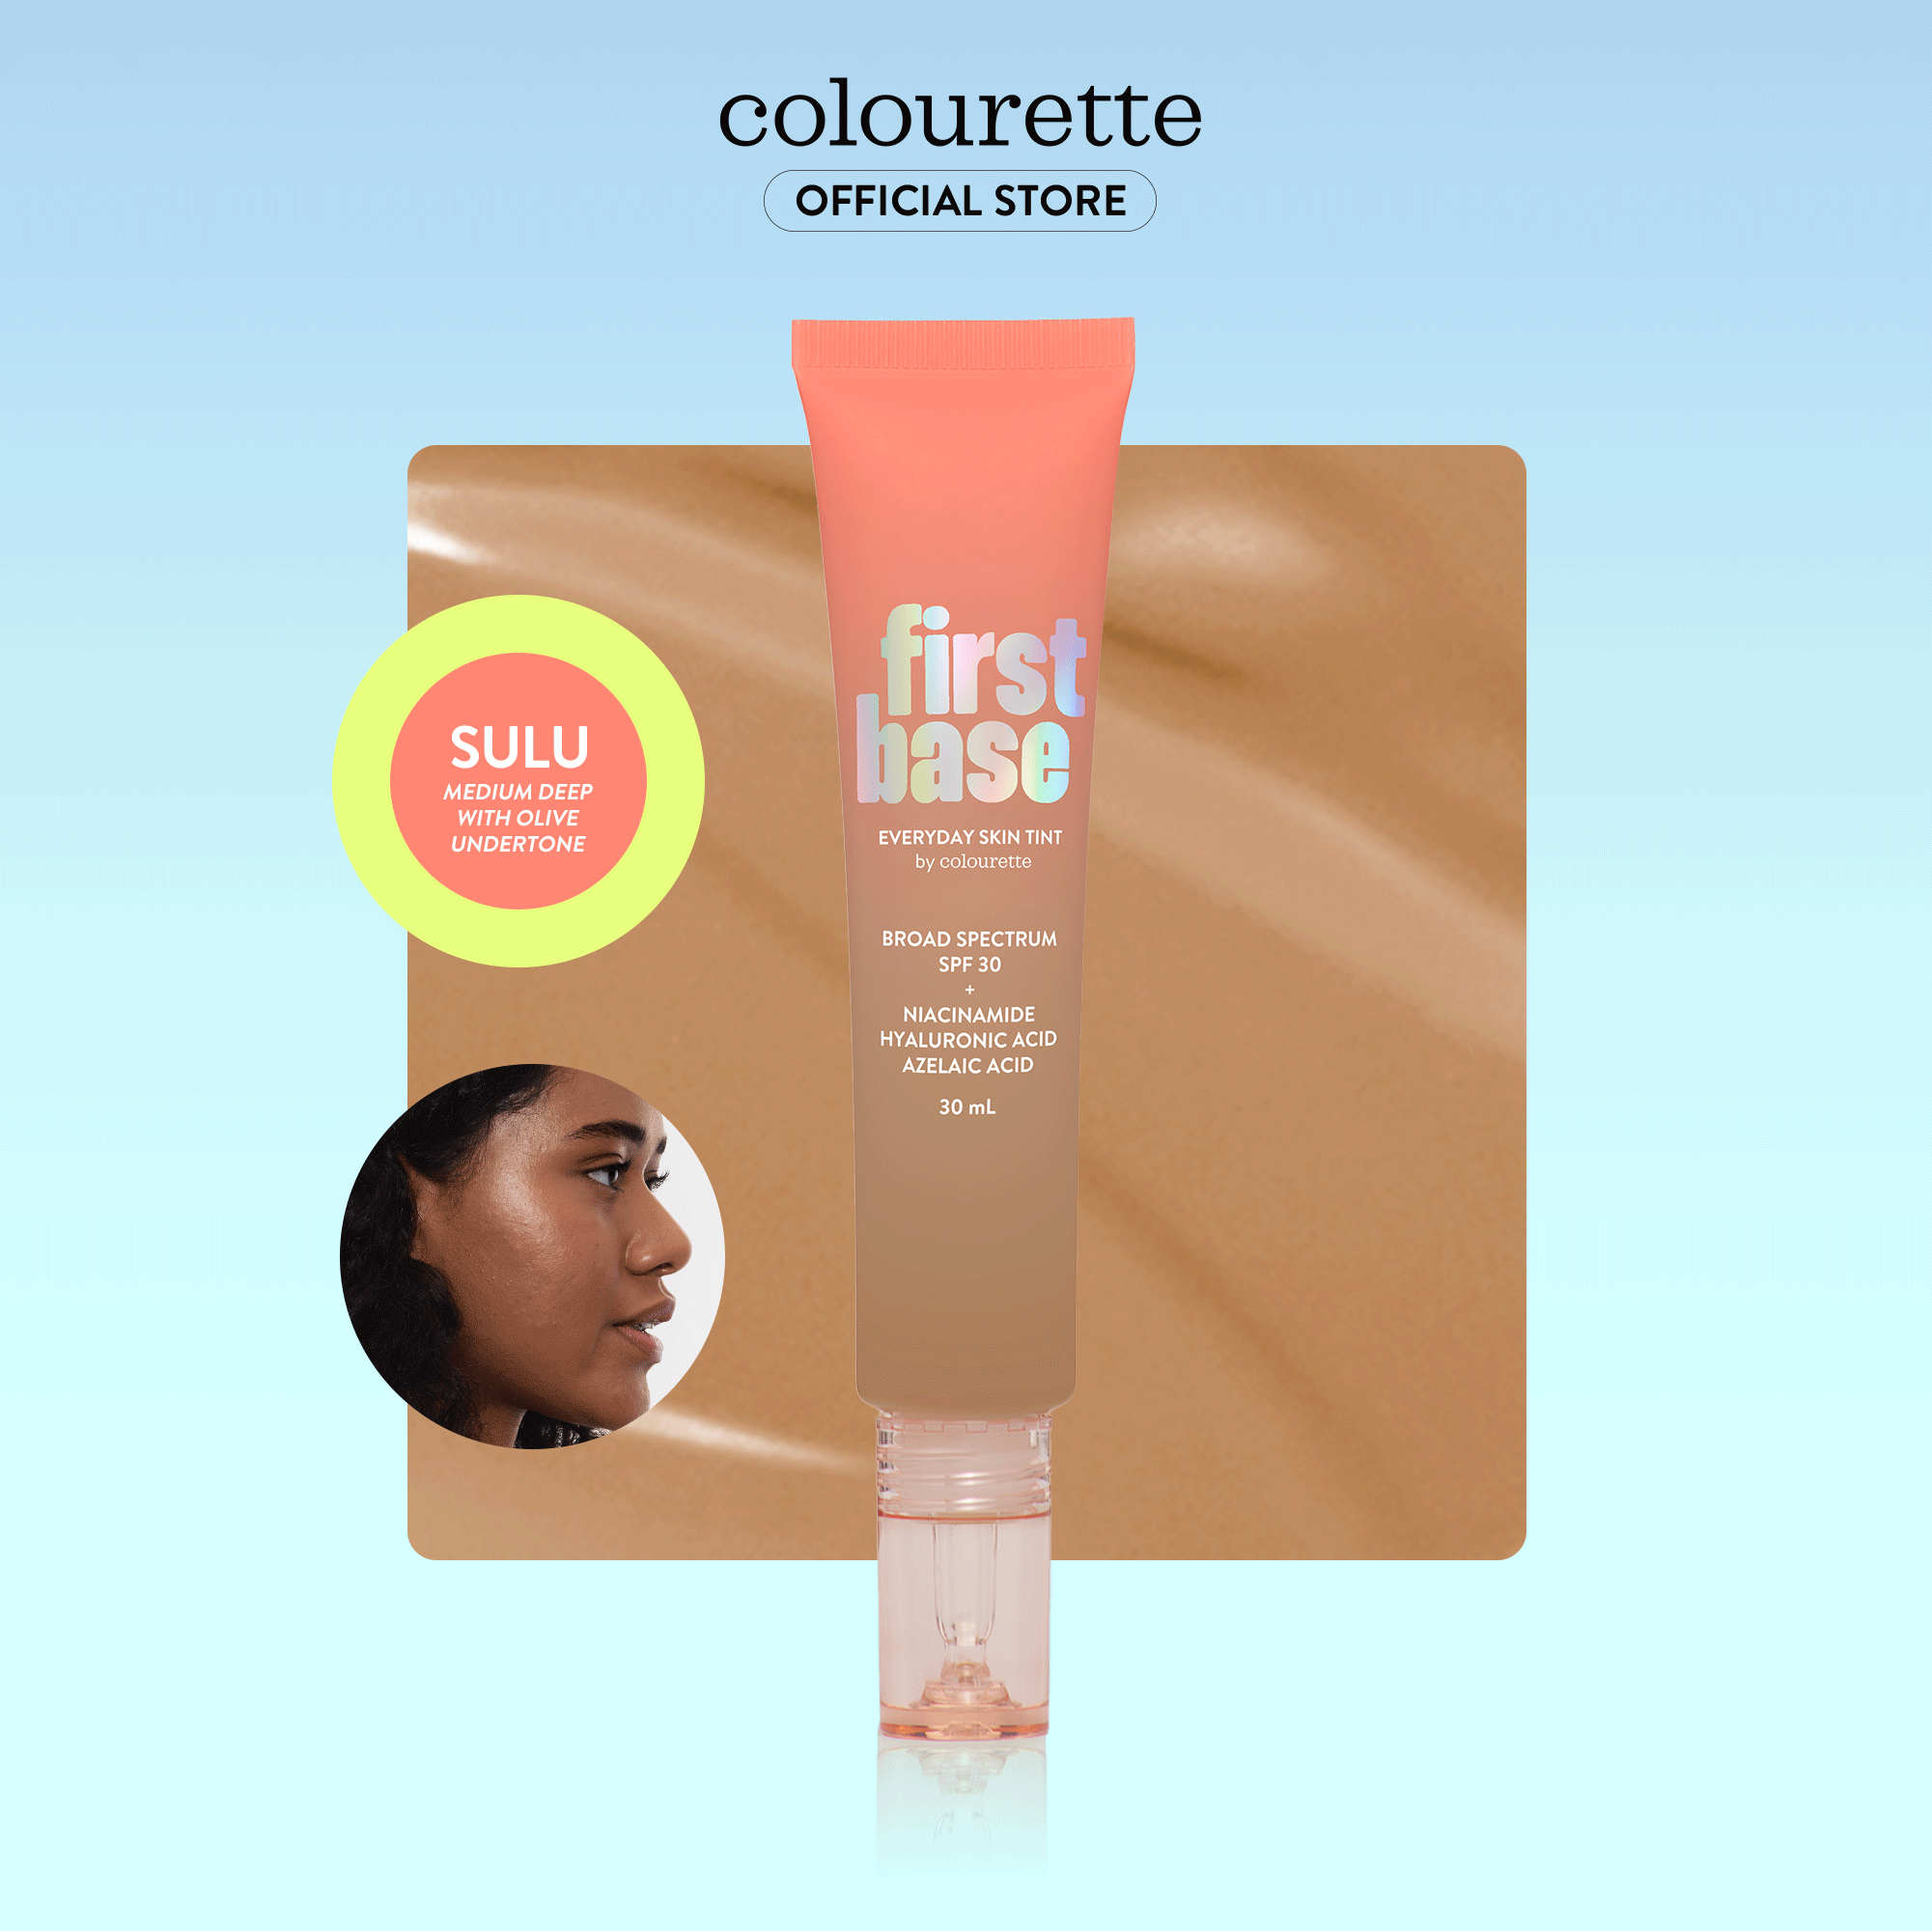 First Base Everyday Skin Tint SPF30 in Sulu